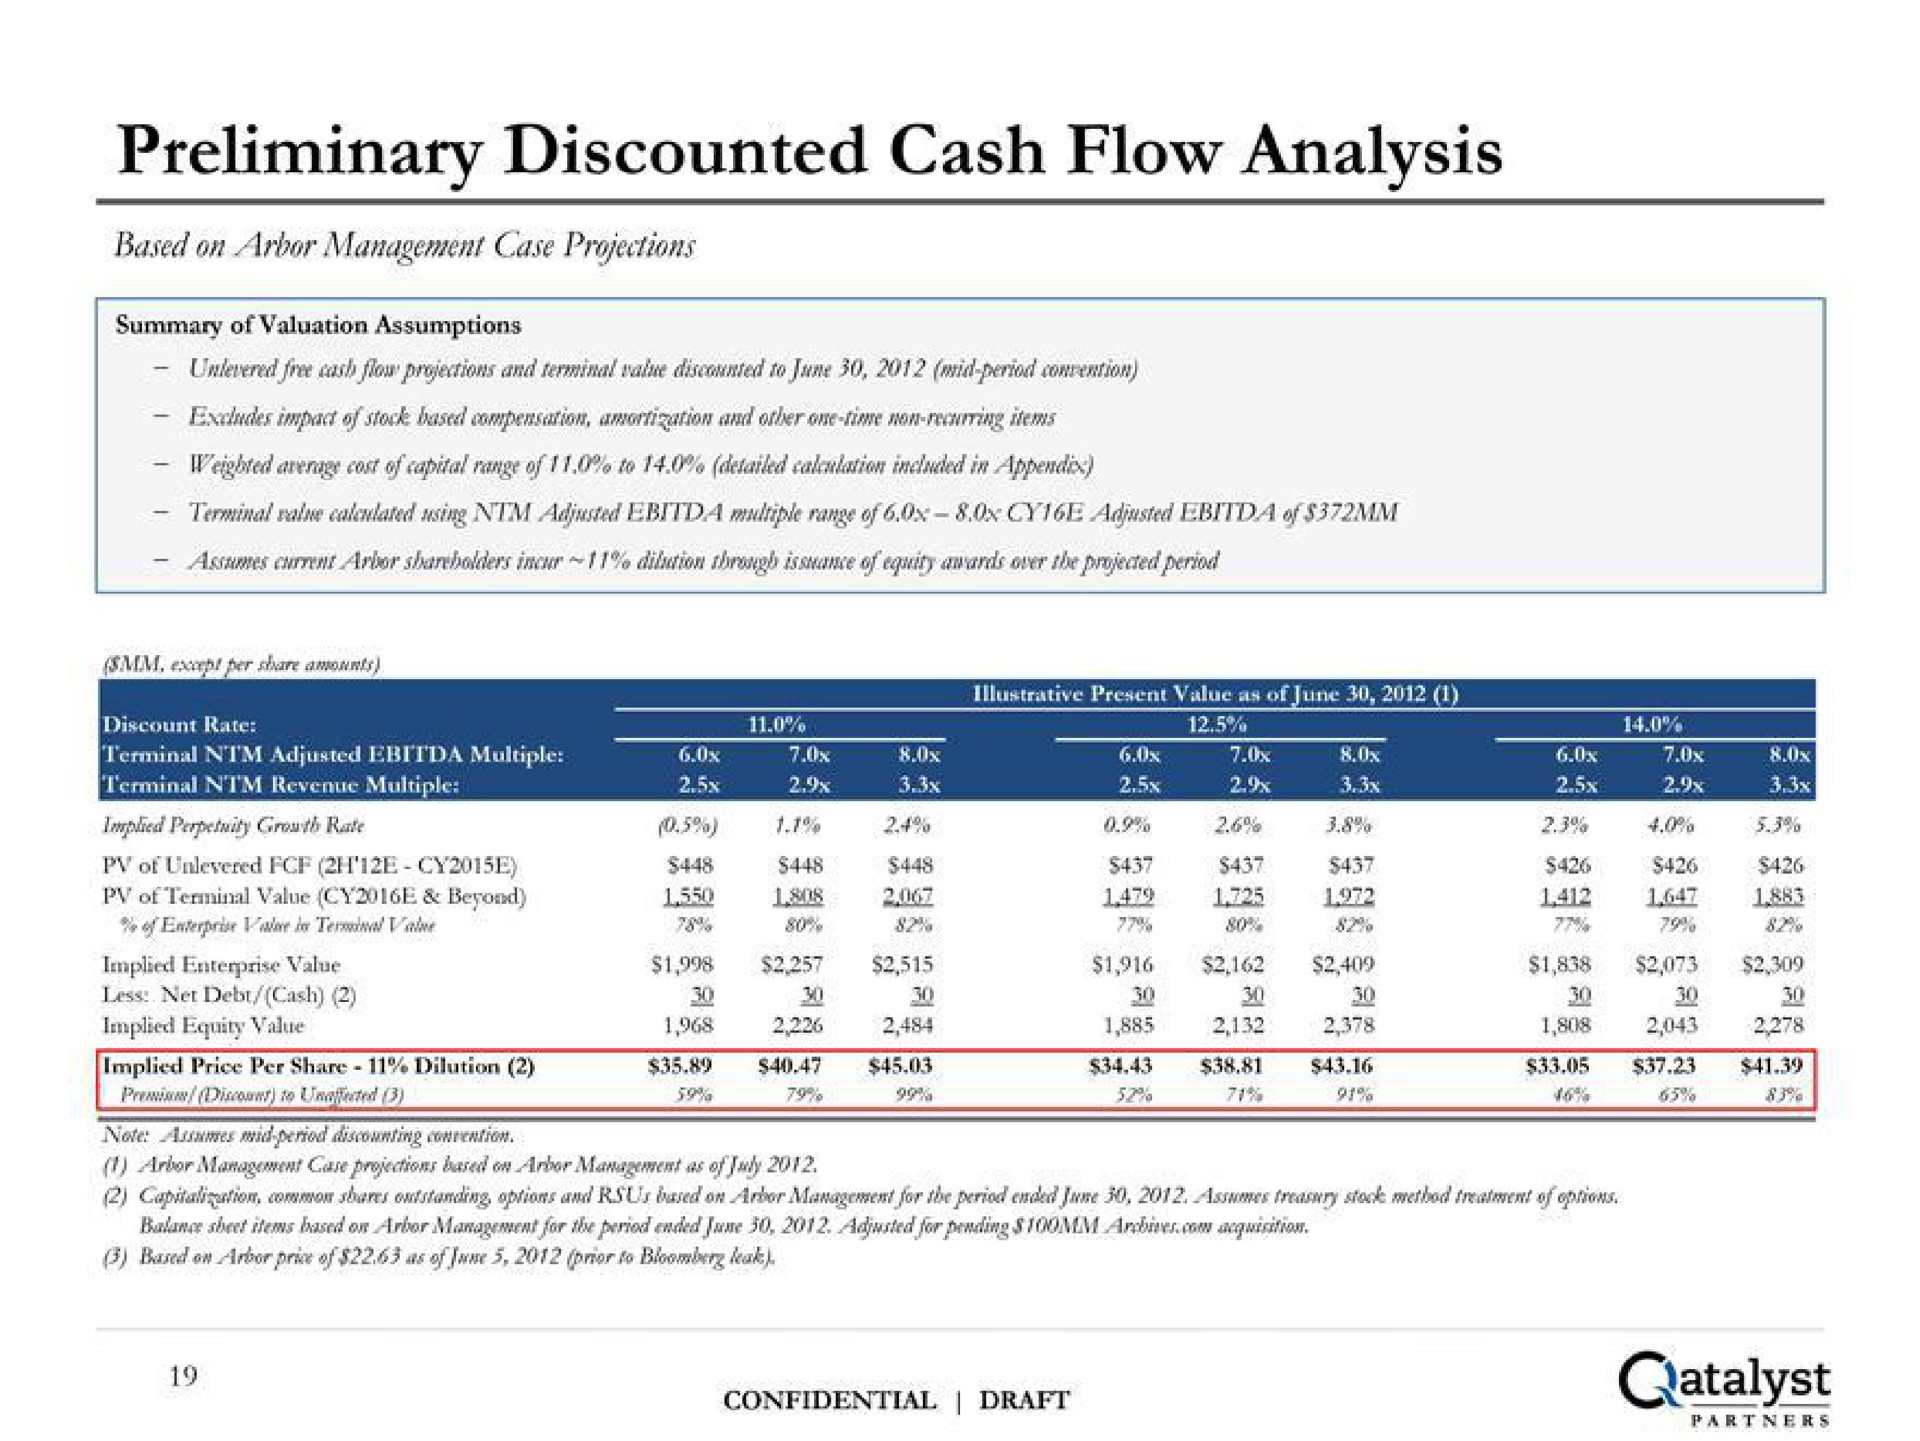 preliminary discounted cash flow analysis | Qatalyst Partners